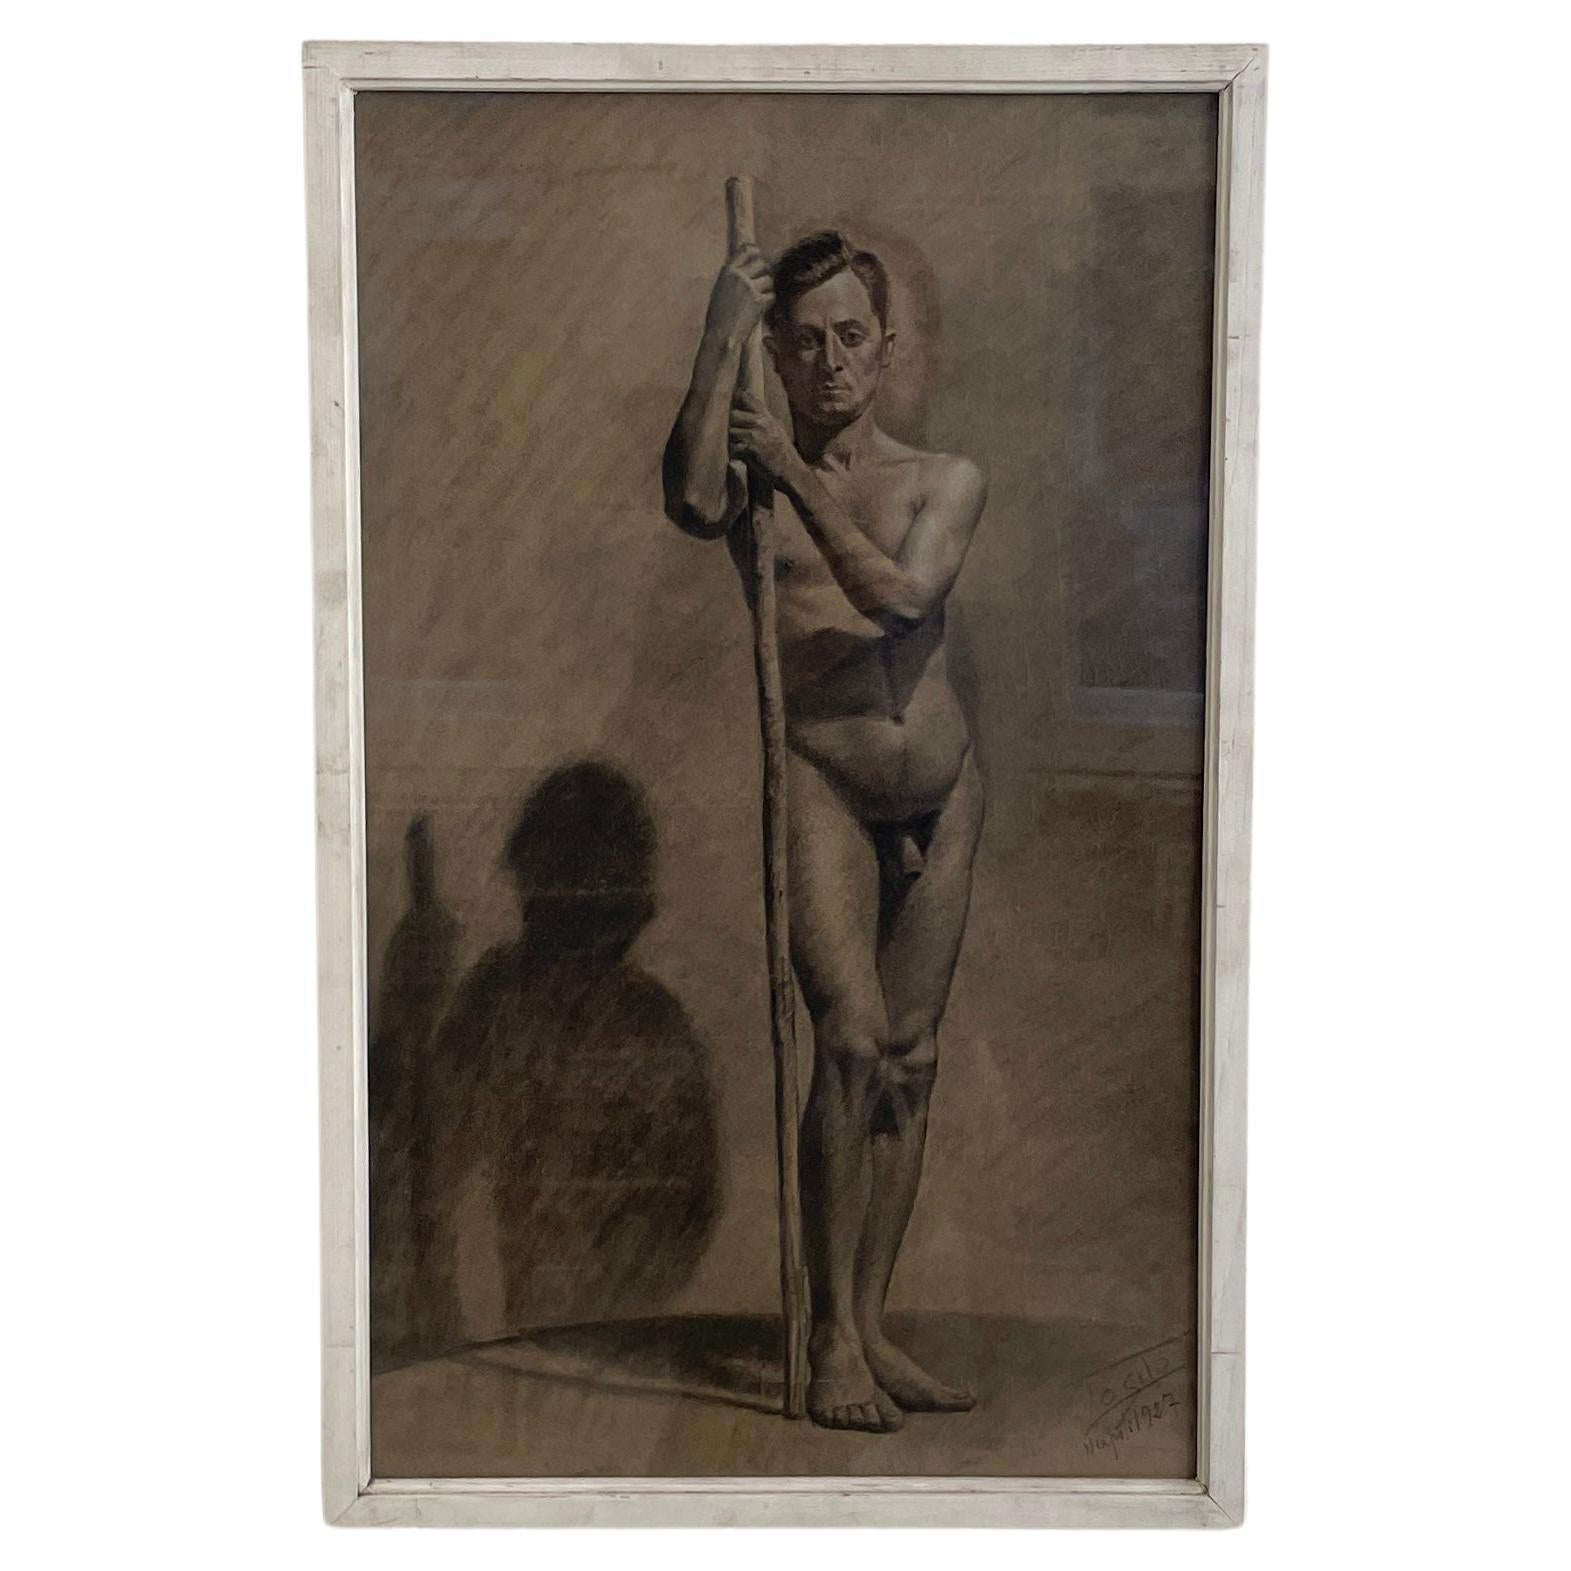 1920s Academic Study Drawing of a Male Nude Model by Luigi Lobito, Italy 1927